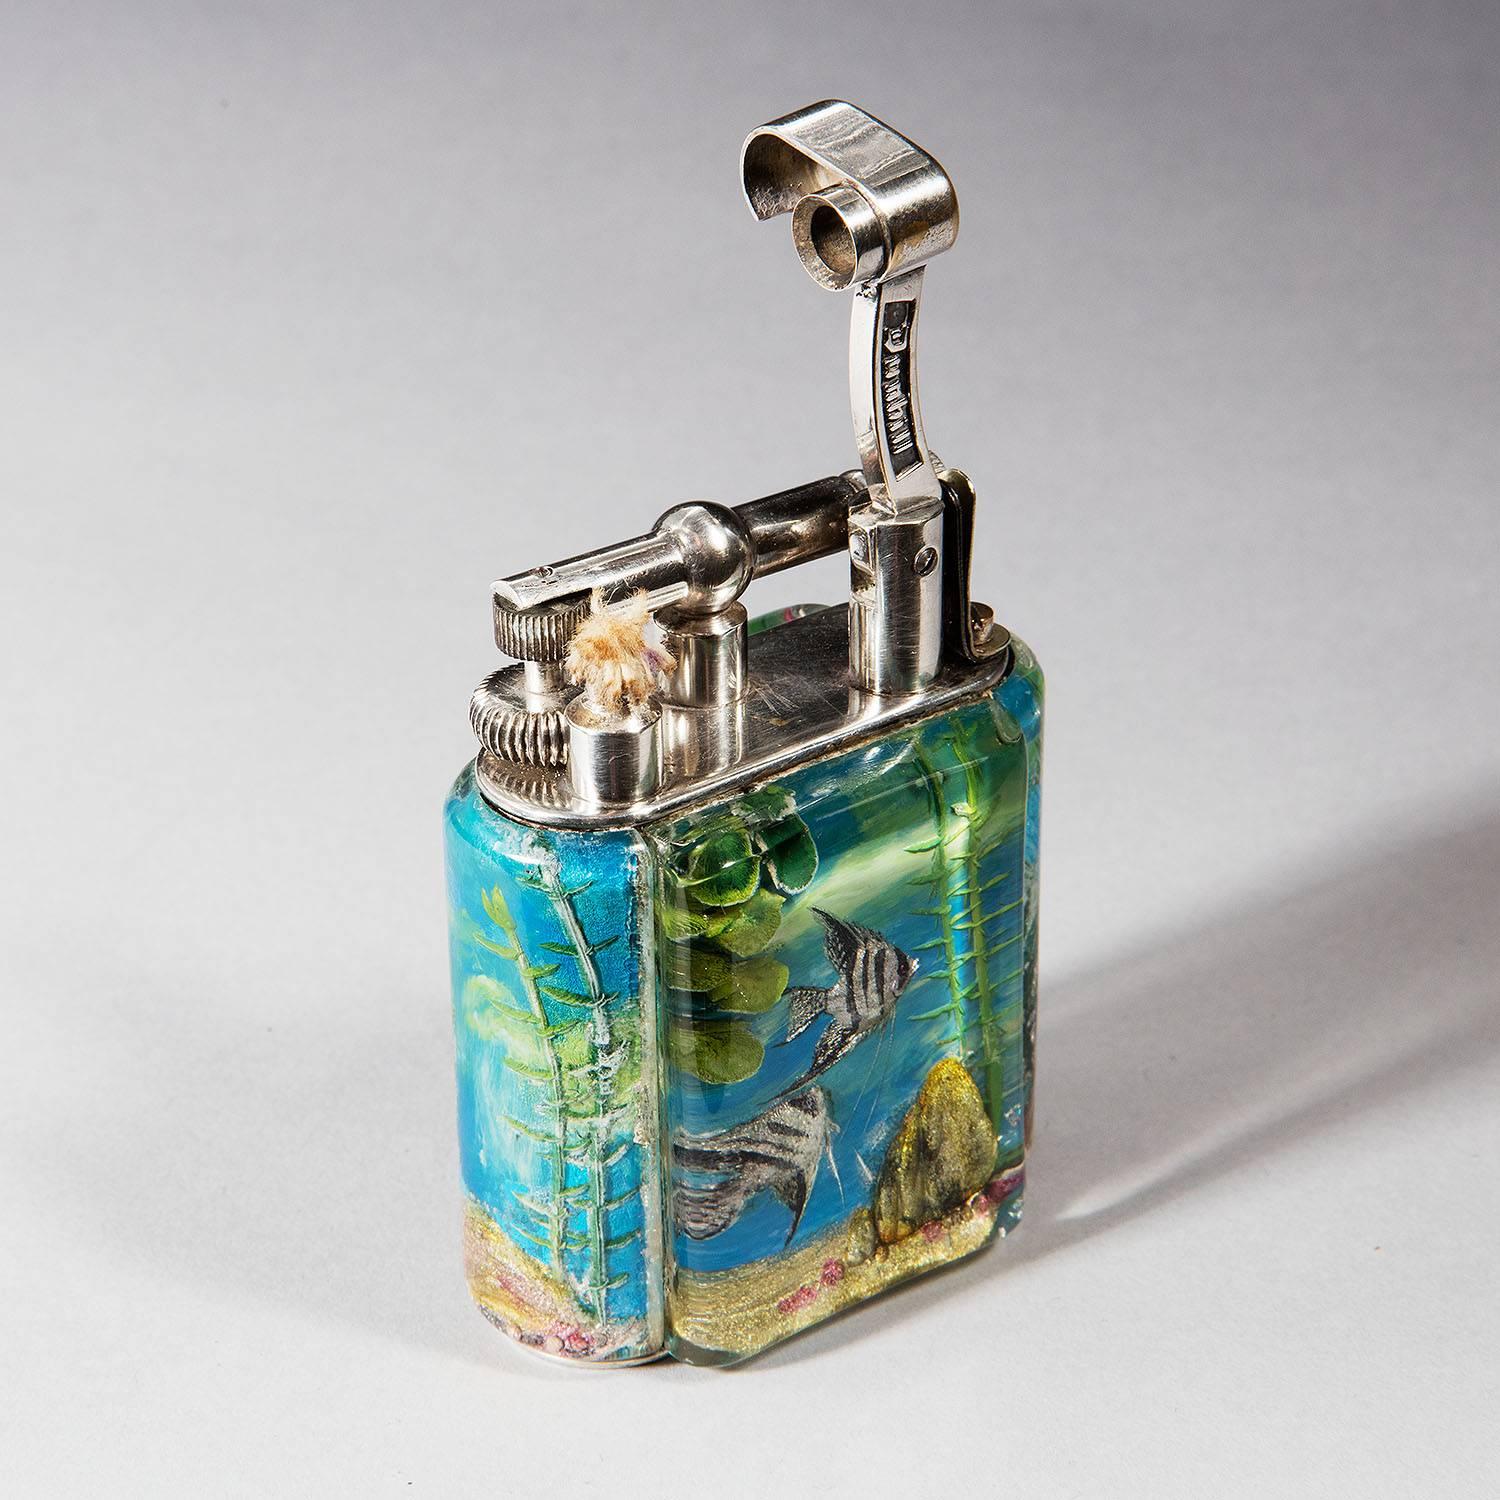 Mid-Century British Dunhill Aquarium Service Size Table Lighter In Excellent Condition In London, by appointment only